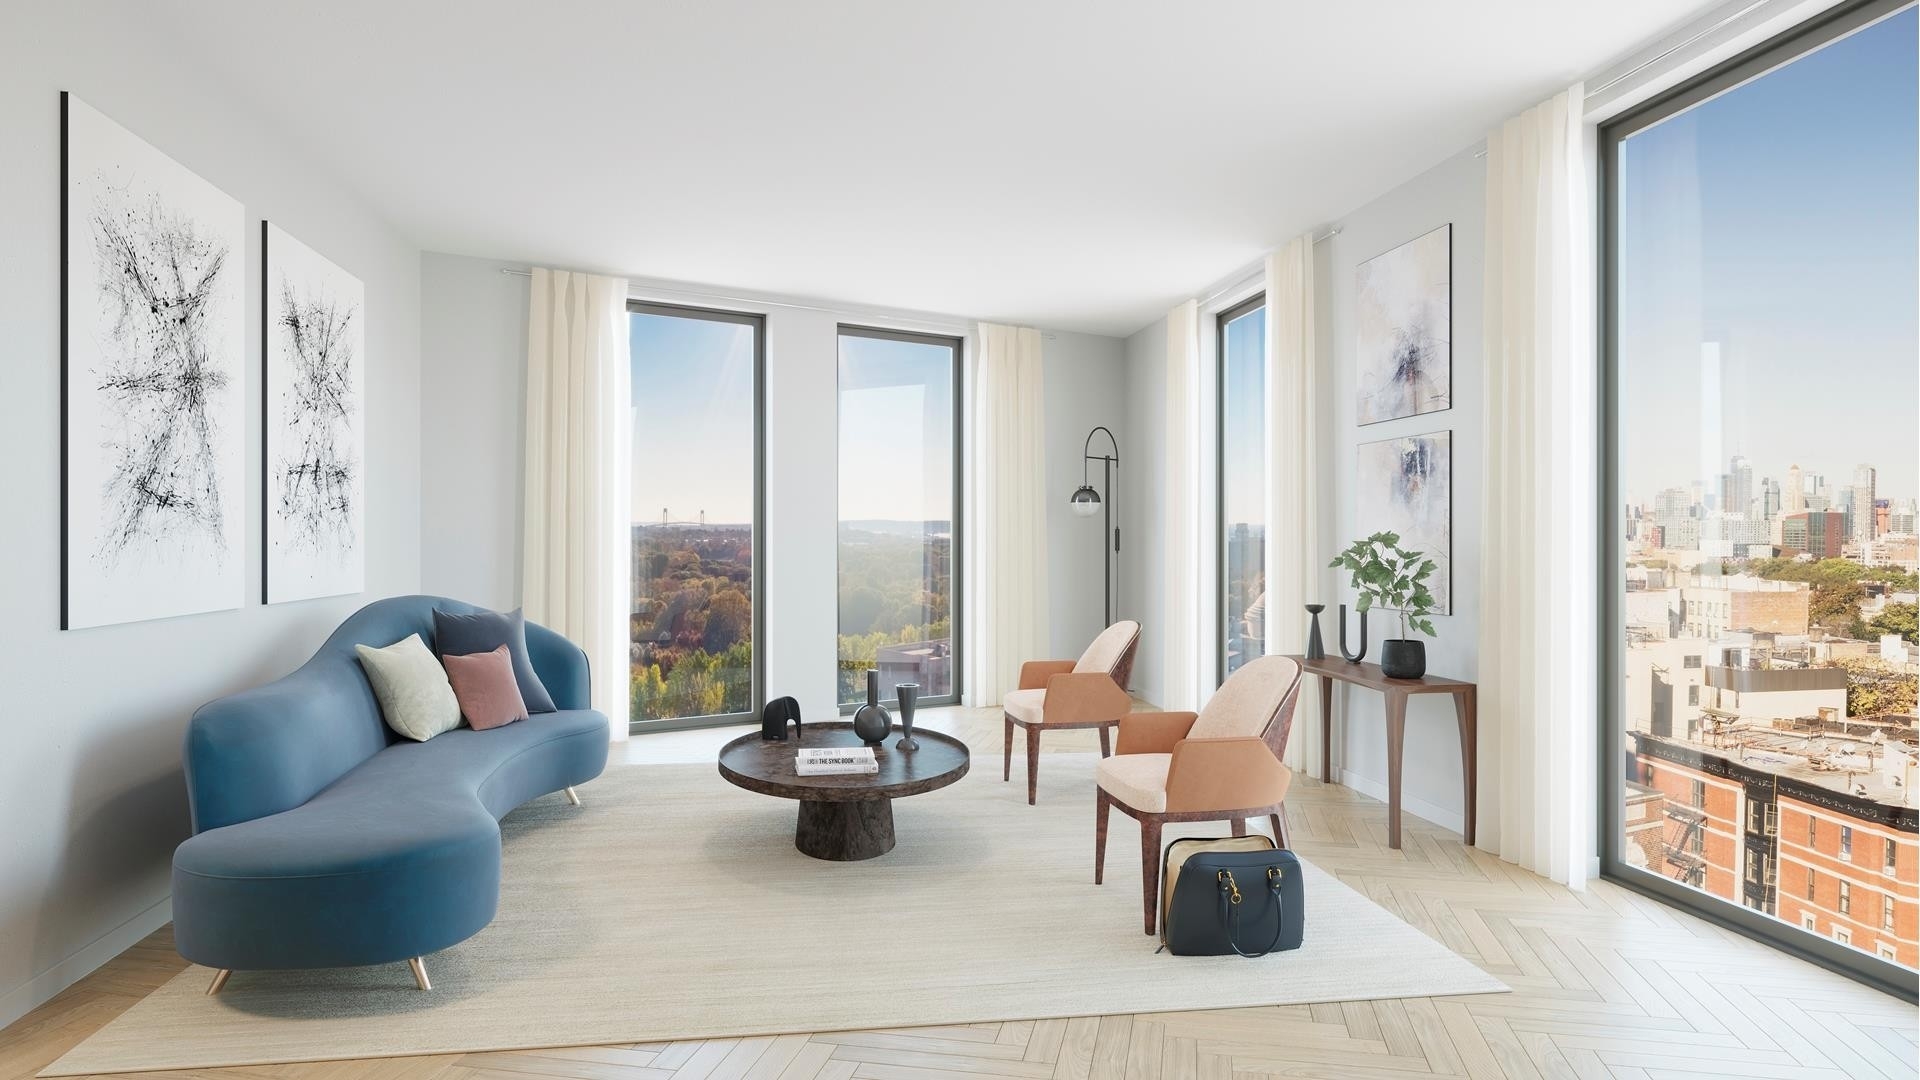 Condominium for Sale at The Museum House, 805 WASHINGTON AVE , PH9B Prospect Heights, Brooklyn, NY 11238